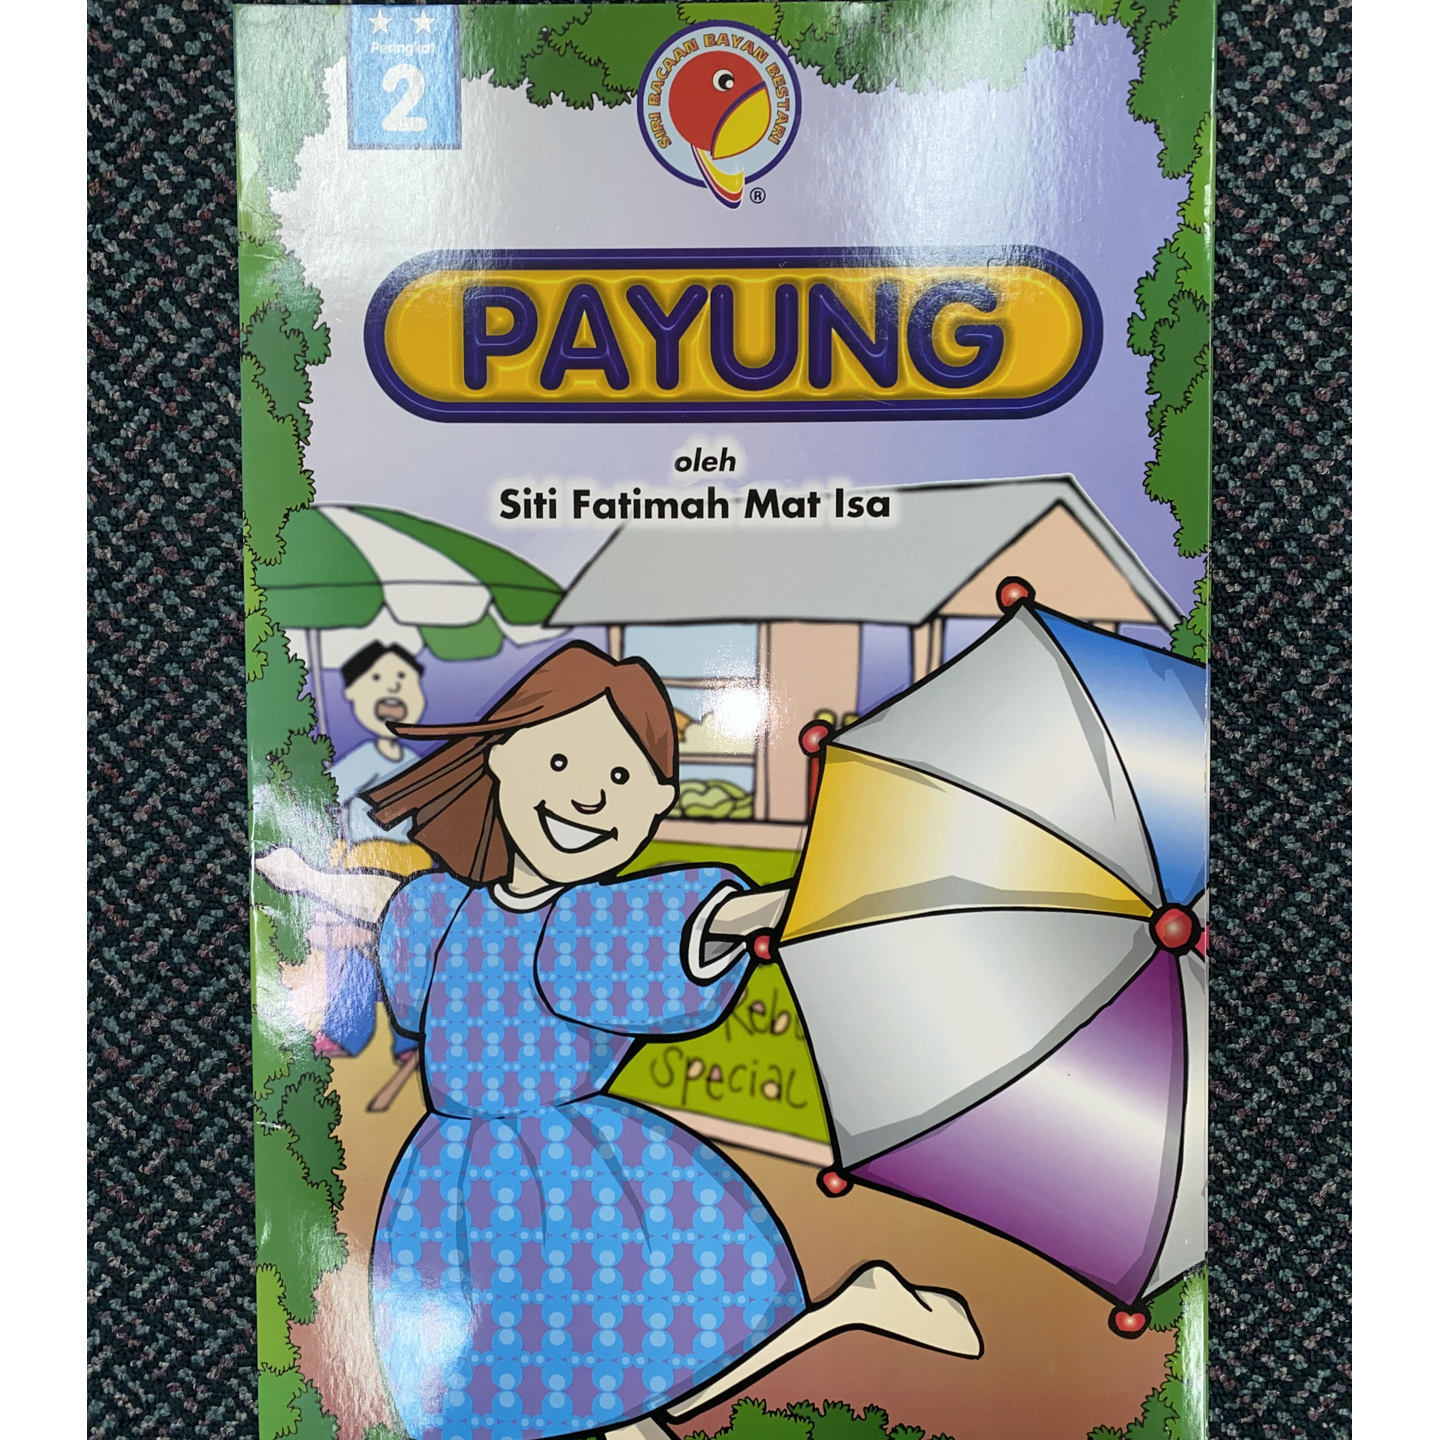 Payung